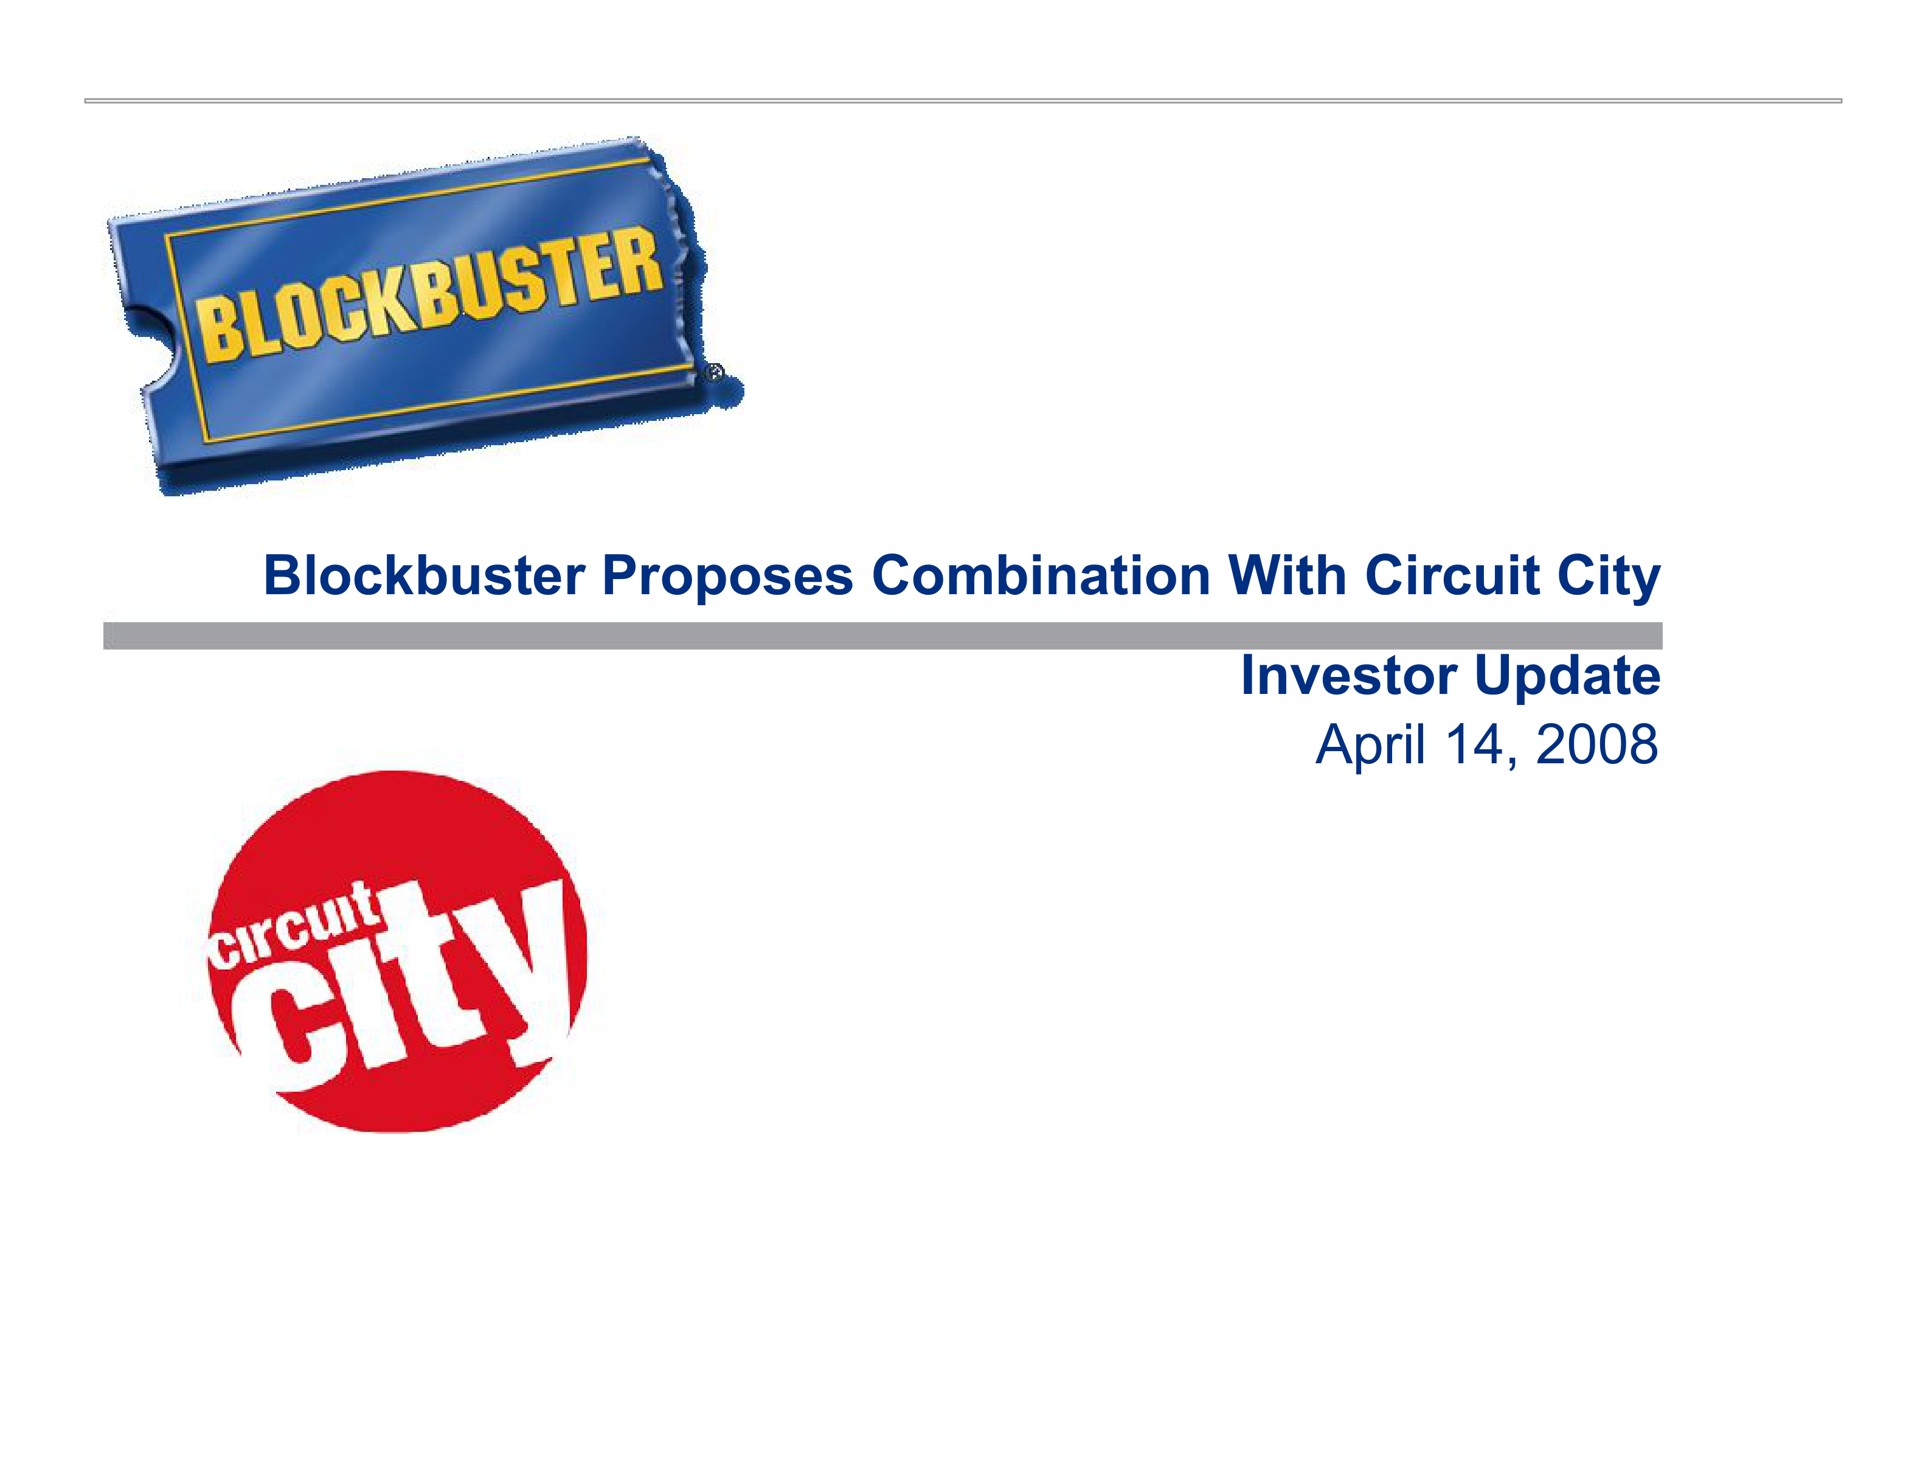 blockbuster proposes combination with circuit city investor update | Blockbuster Video